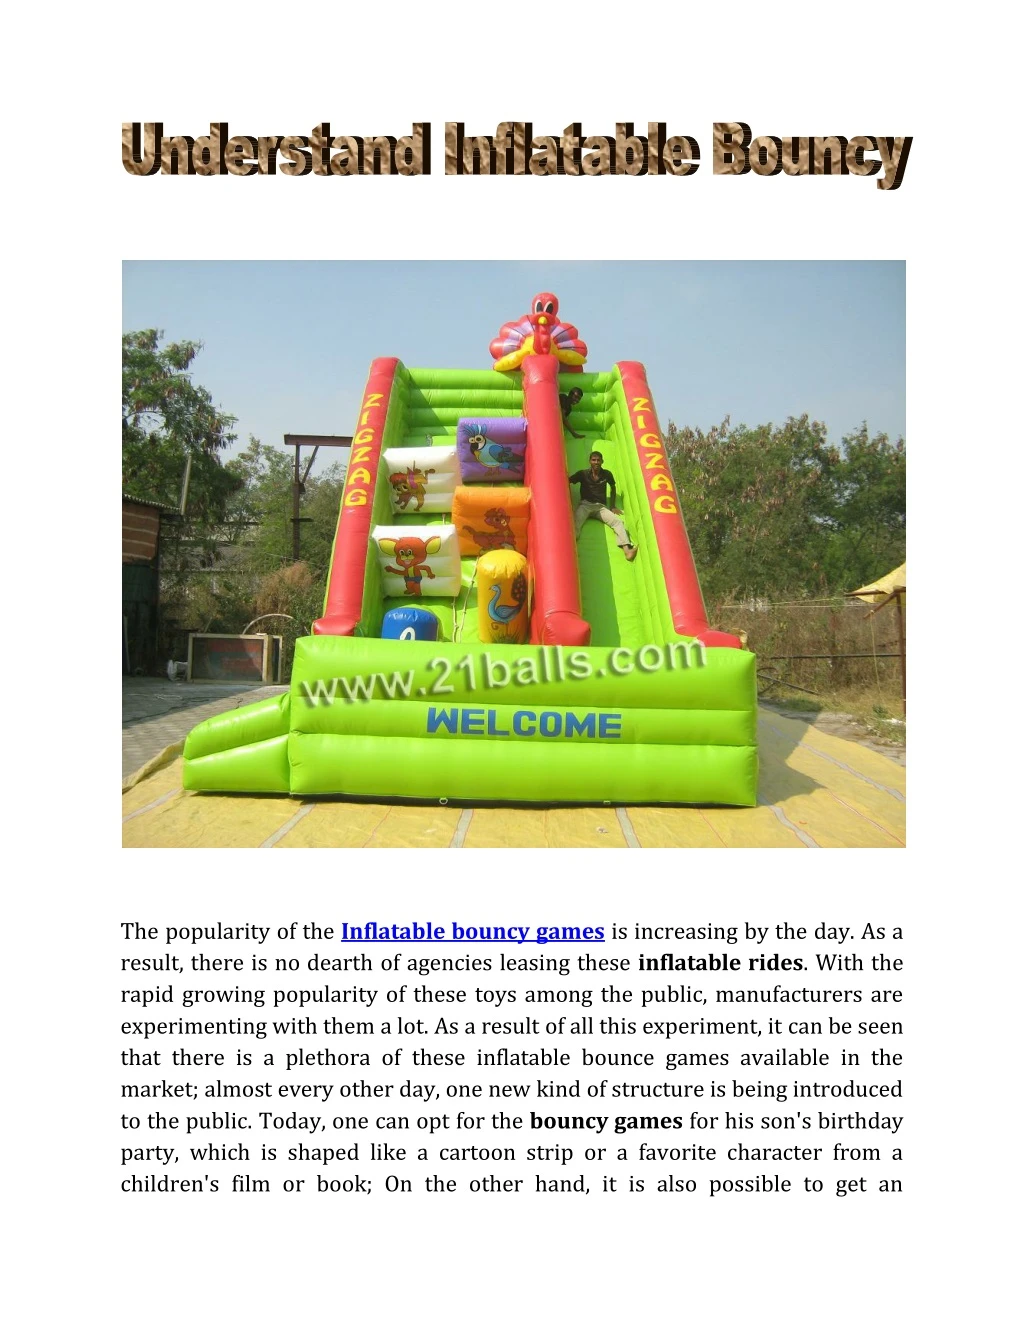 the popularity of the inflatable bouncy games